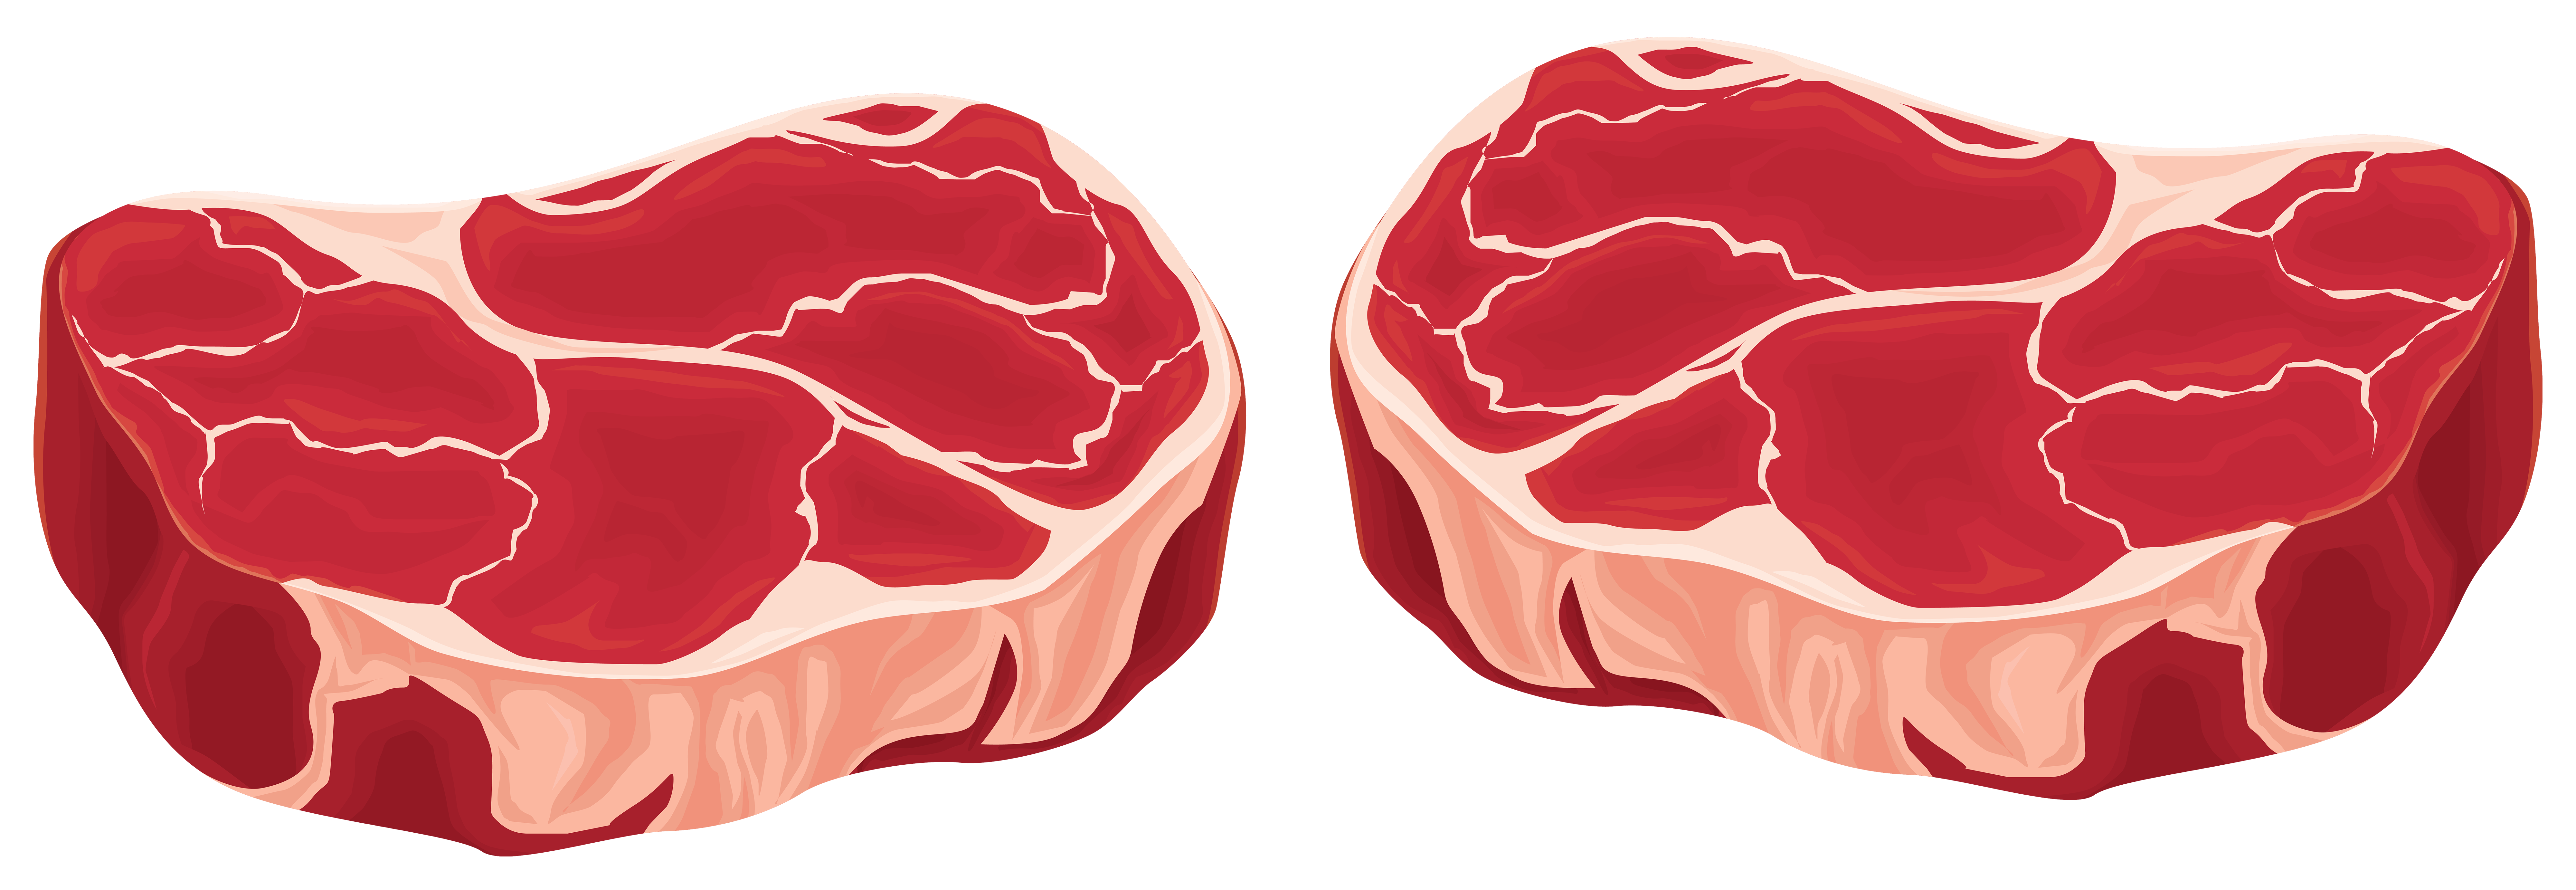 raw meat clipart - photo #34